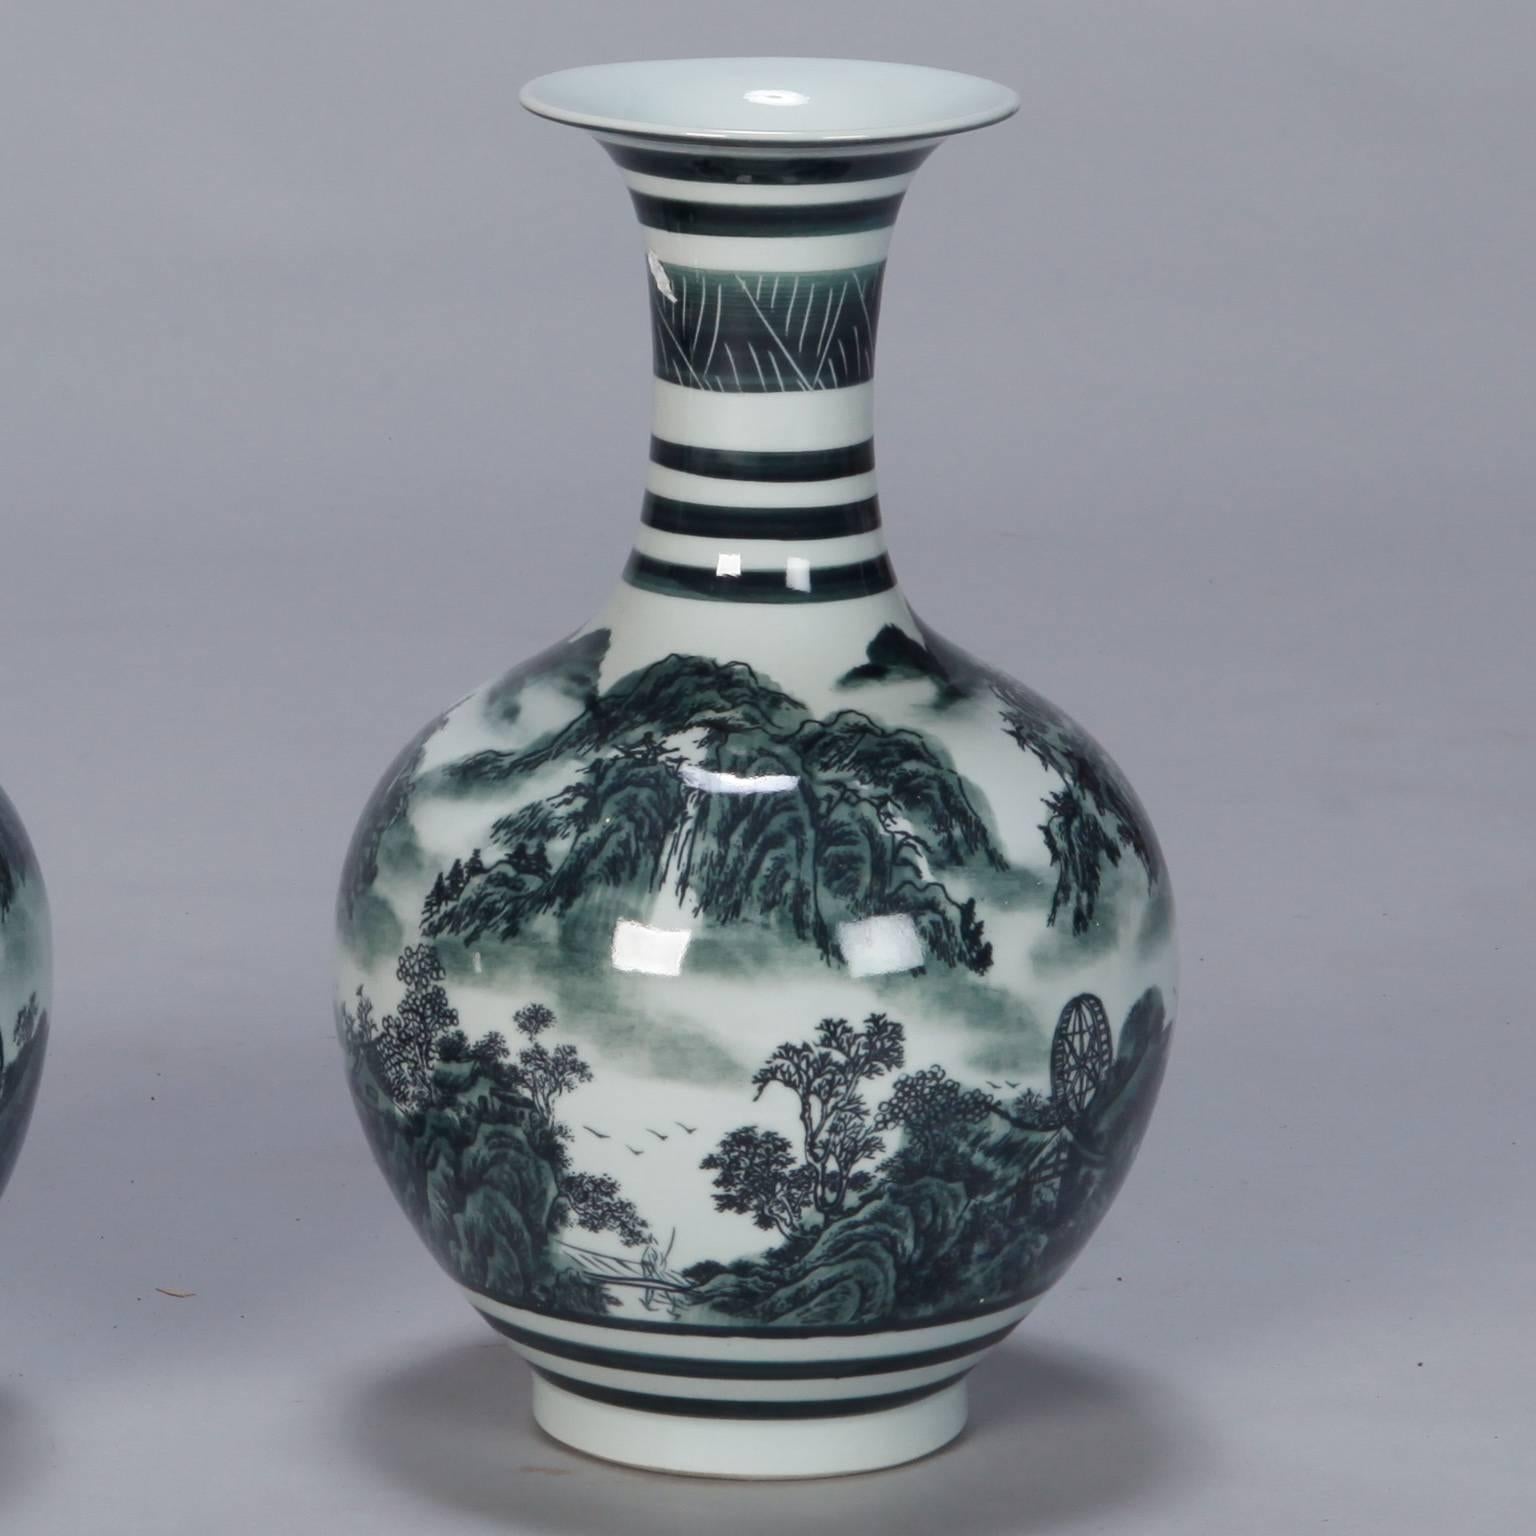 Pair of Chinese porcelain vases with round bodies and flared necks with decorative glaze that depicts traditional mountain-scape scenery in shades of deep green and white. Sold and priced as a pair.